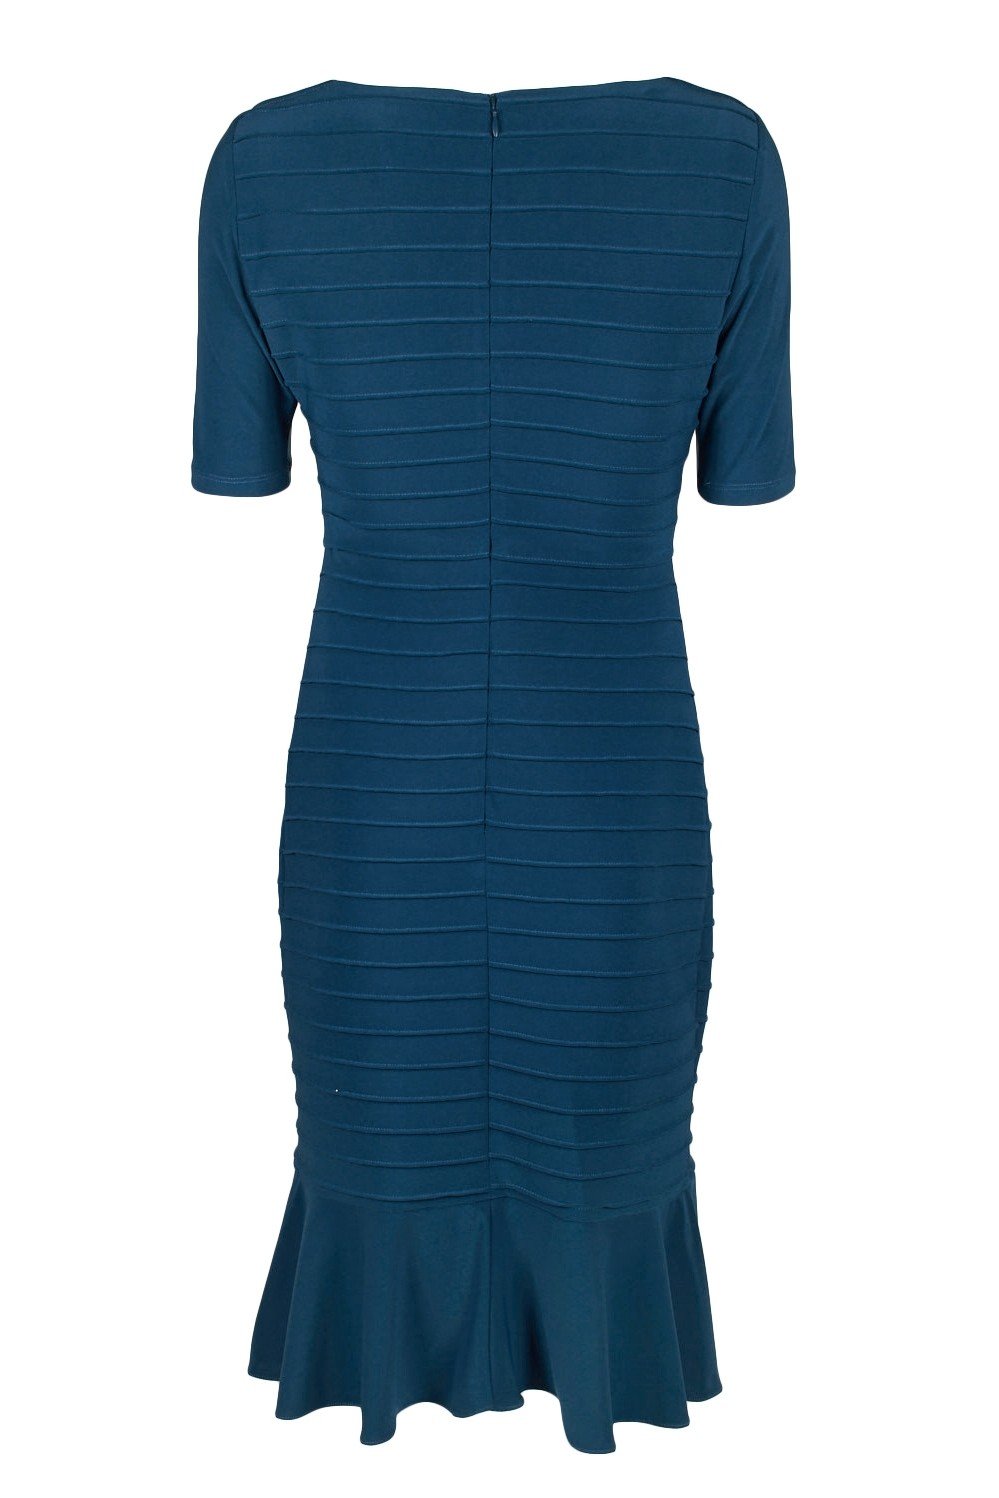 Adrianna Papell - AP1D103506 Bateau Ribbed Jersey Sheath Dress In Blue